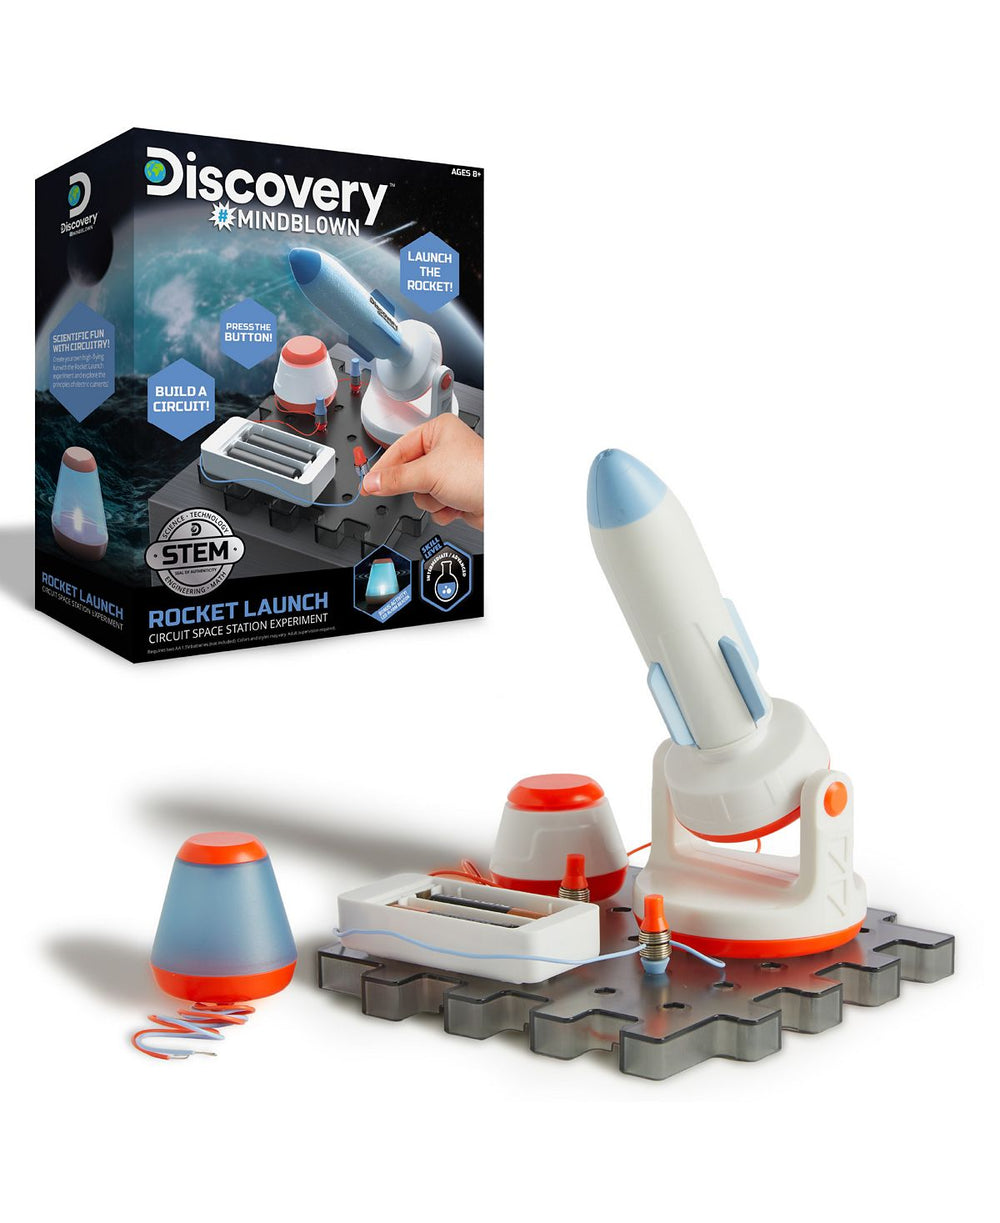 Discovery #MINDBLOWN Rocket Launch Circuitry Science Kit